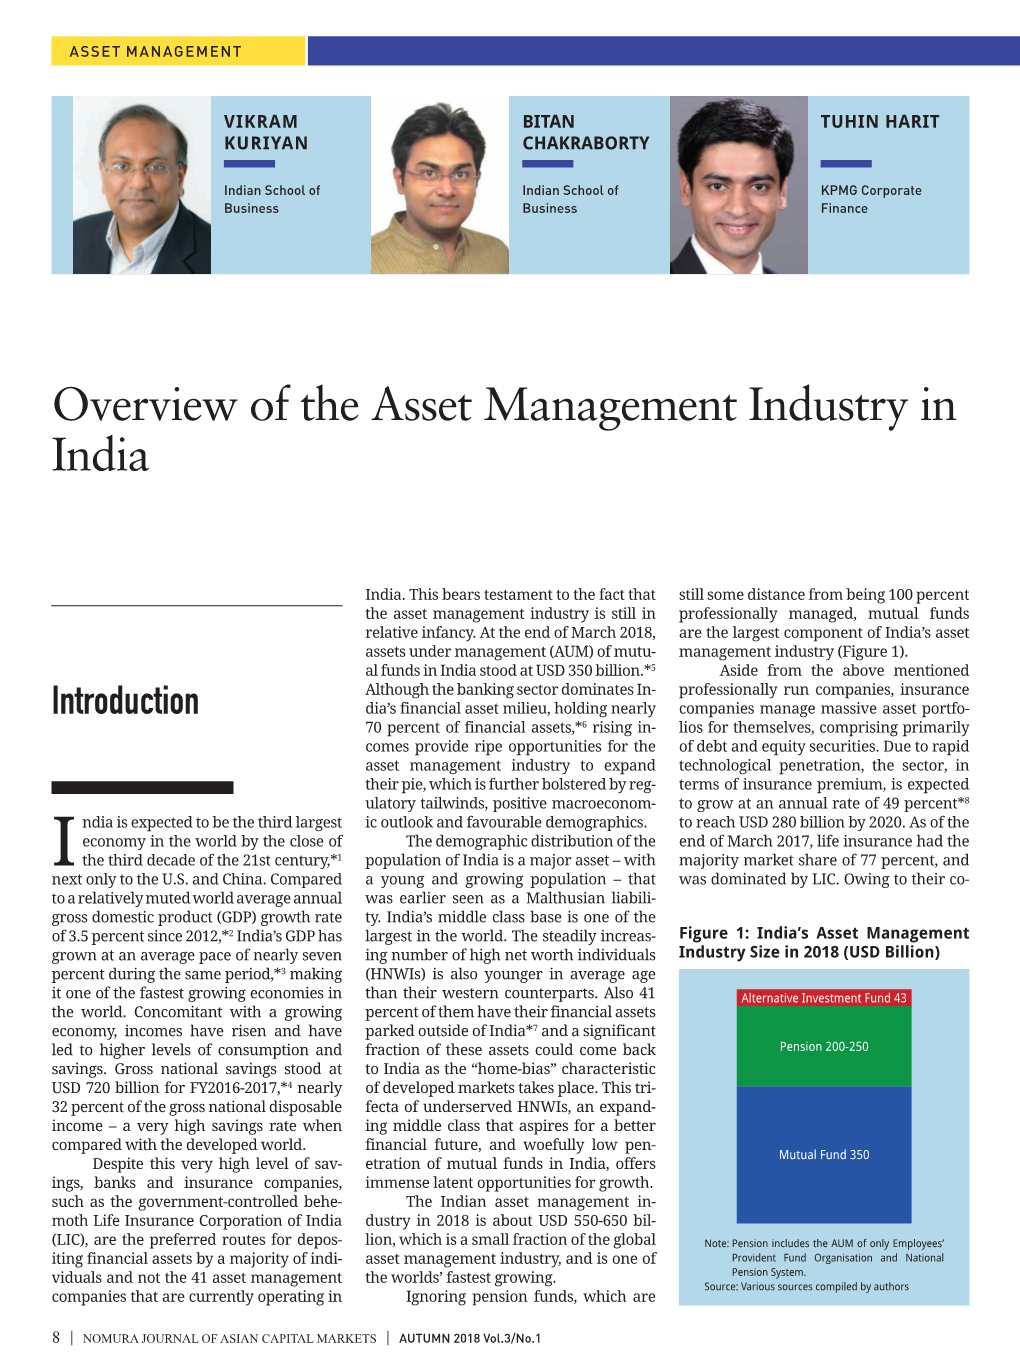 Overview of the Asset Management Industry in India